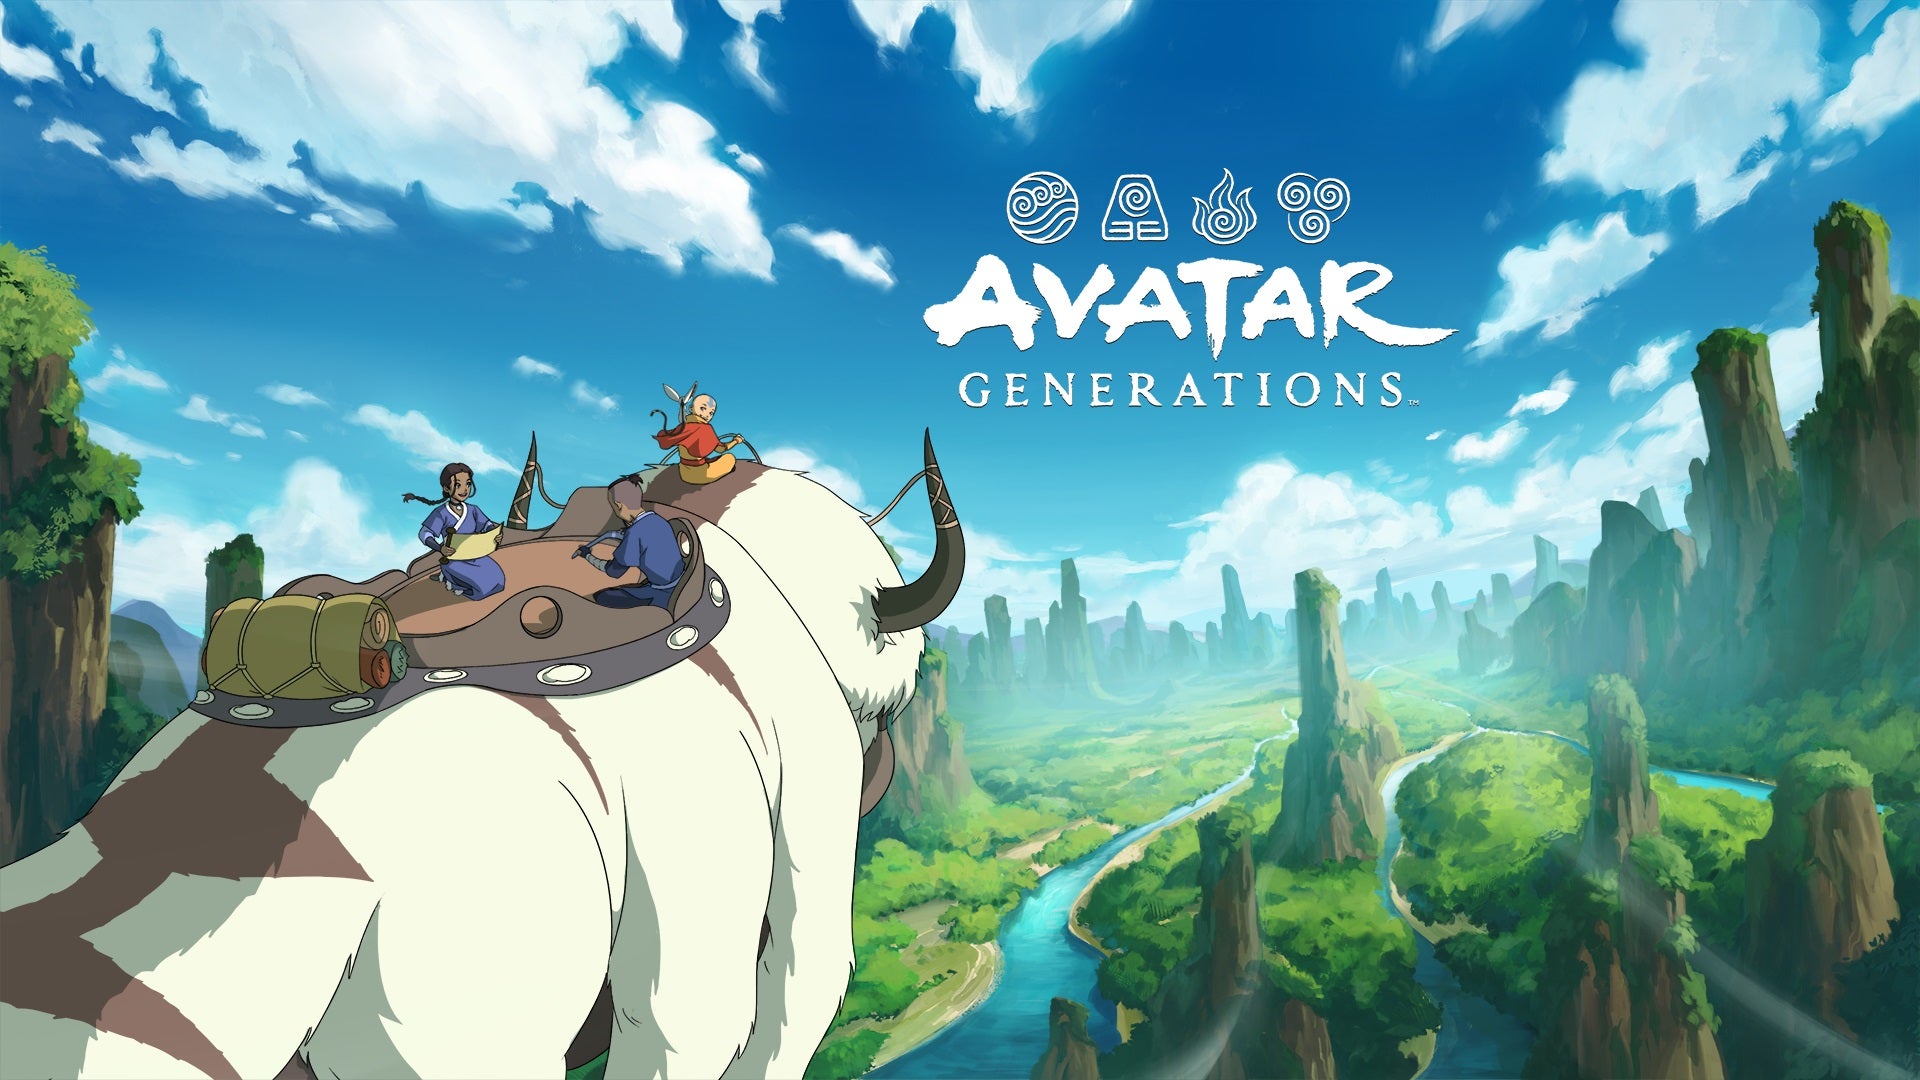 Key art for Avatar: Generations showing Aang, Katara, Sokka and Momo riding on Appa over an open space with rivers, grass, and rock formations.